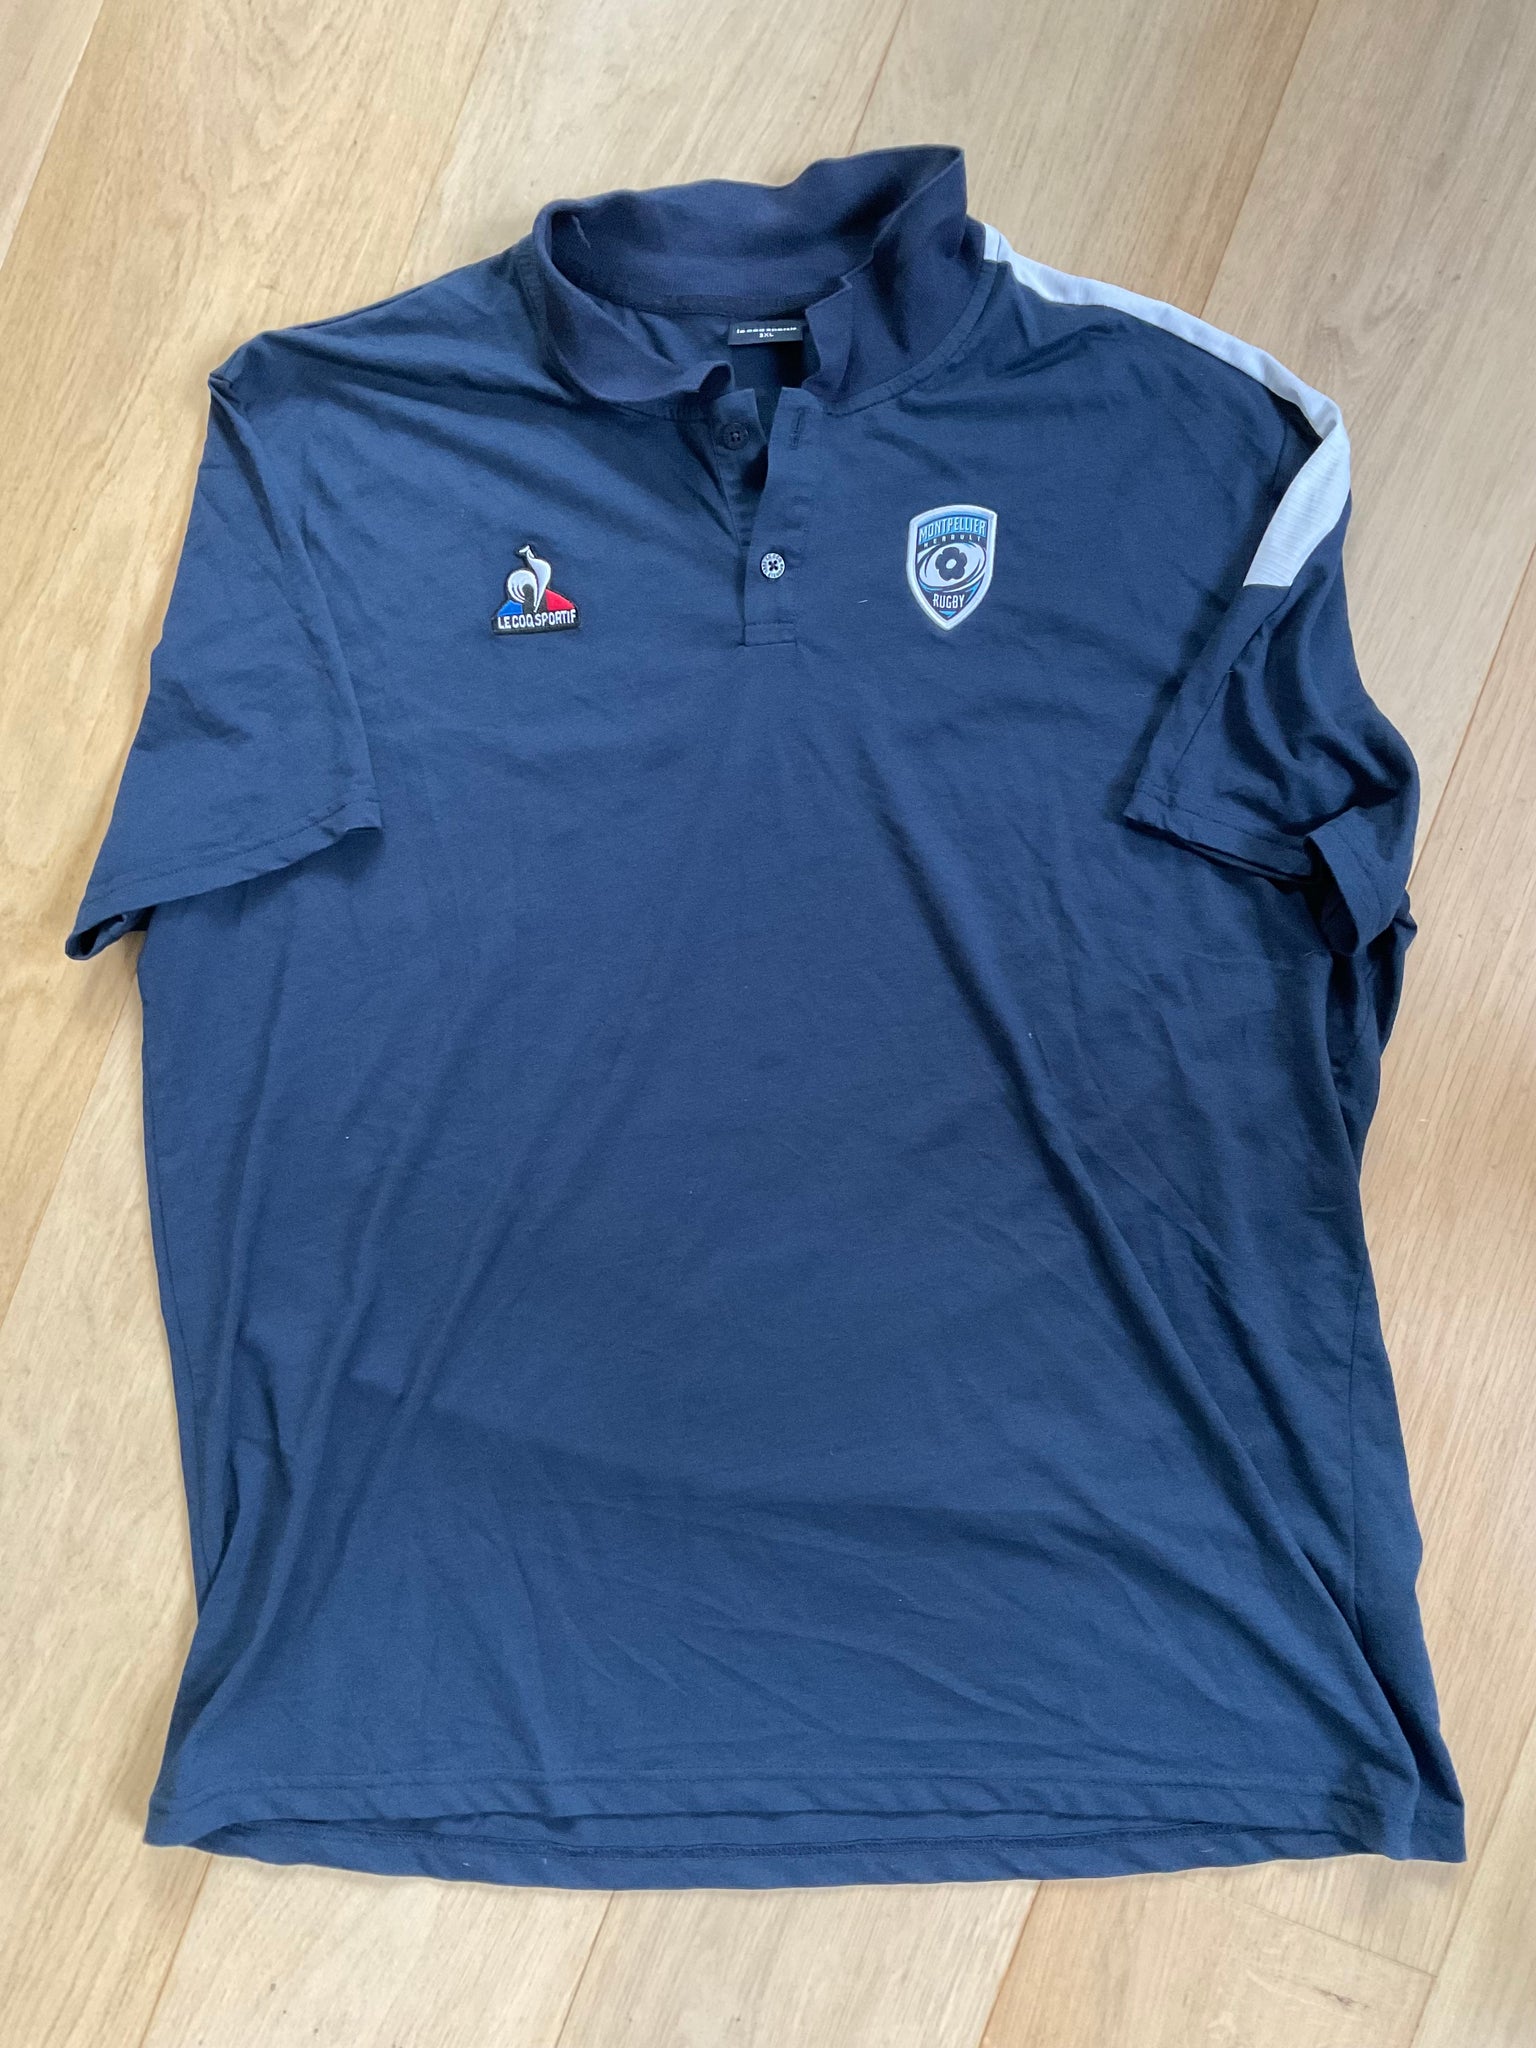 Elliott Stooke - Montpellier Rugby Polo Shirt [Blue with White]